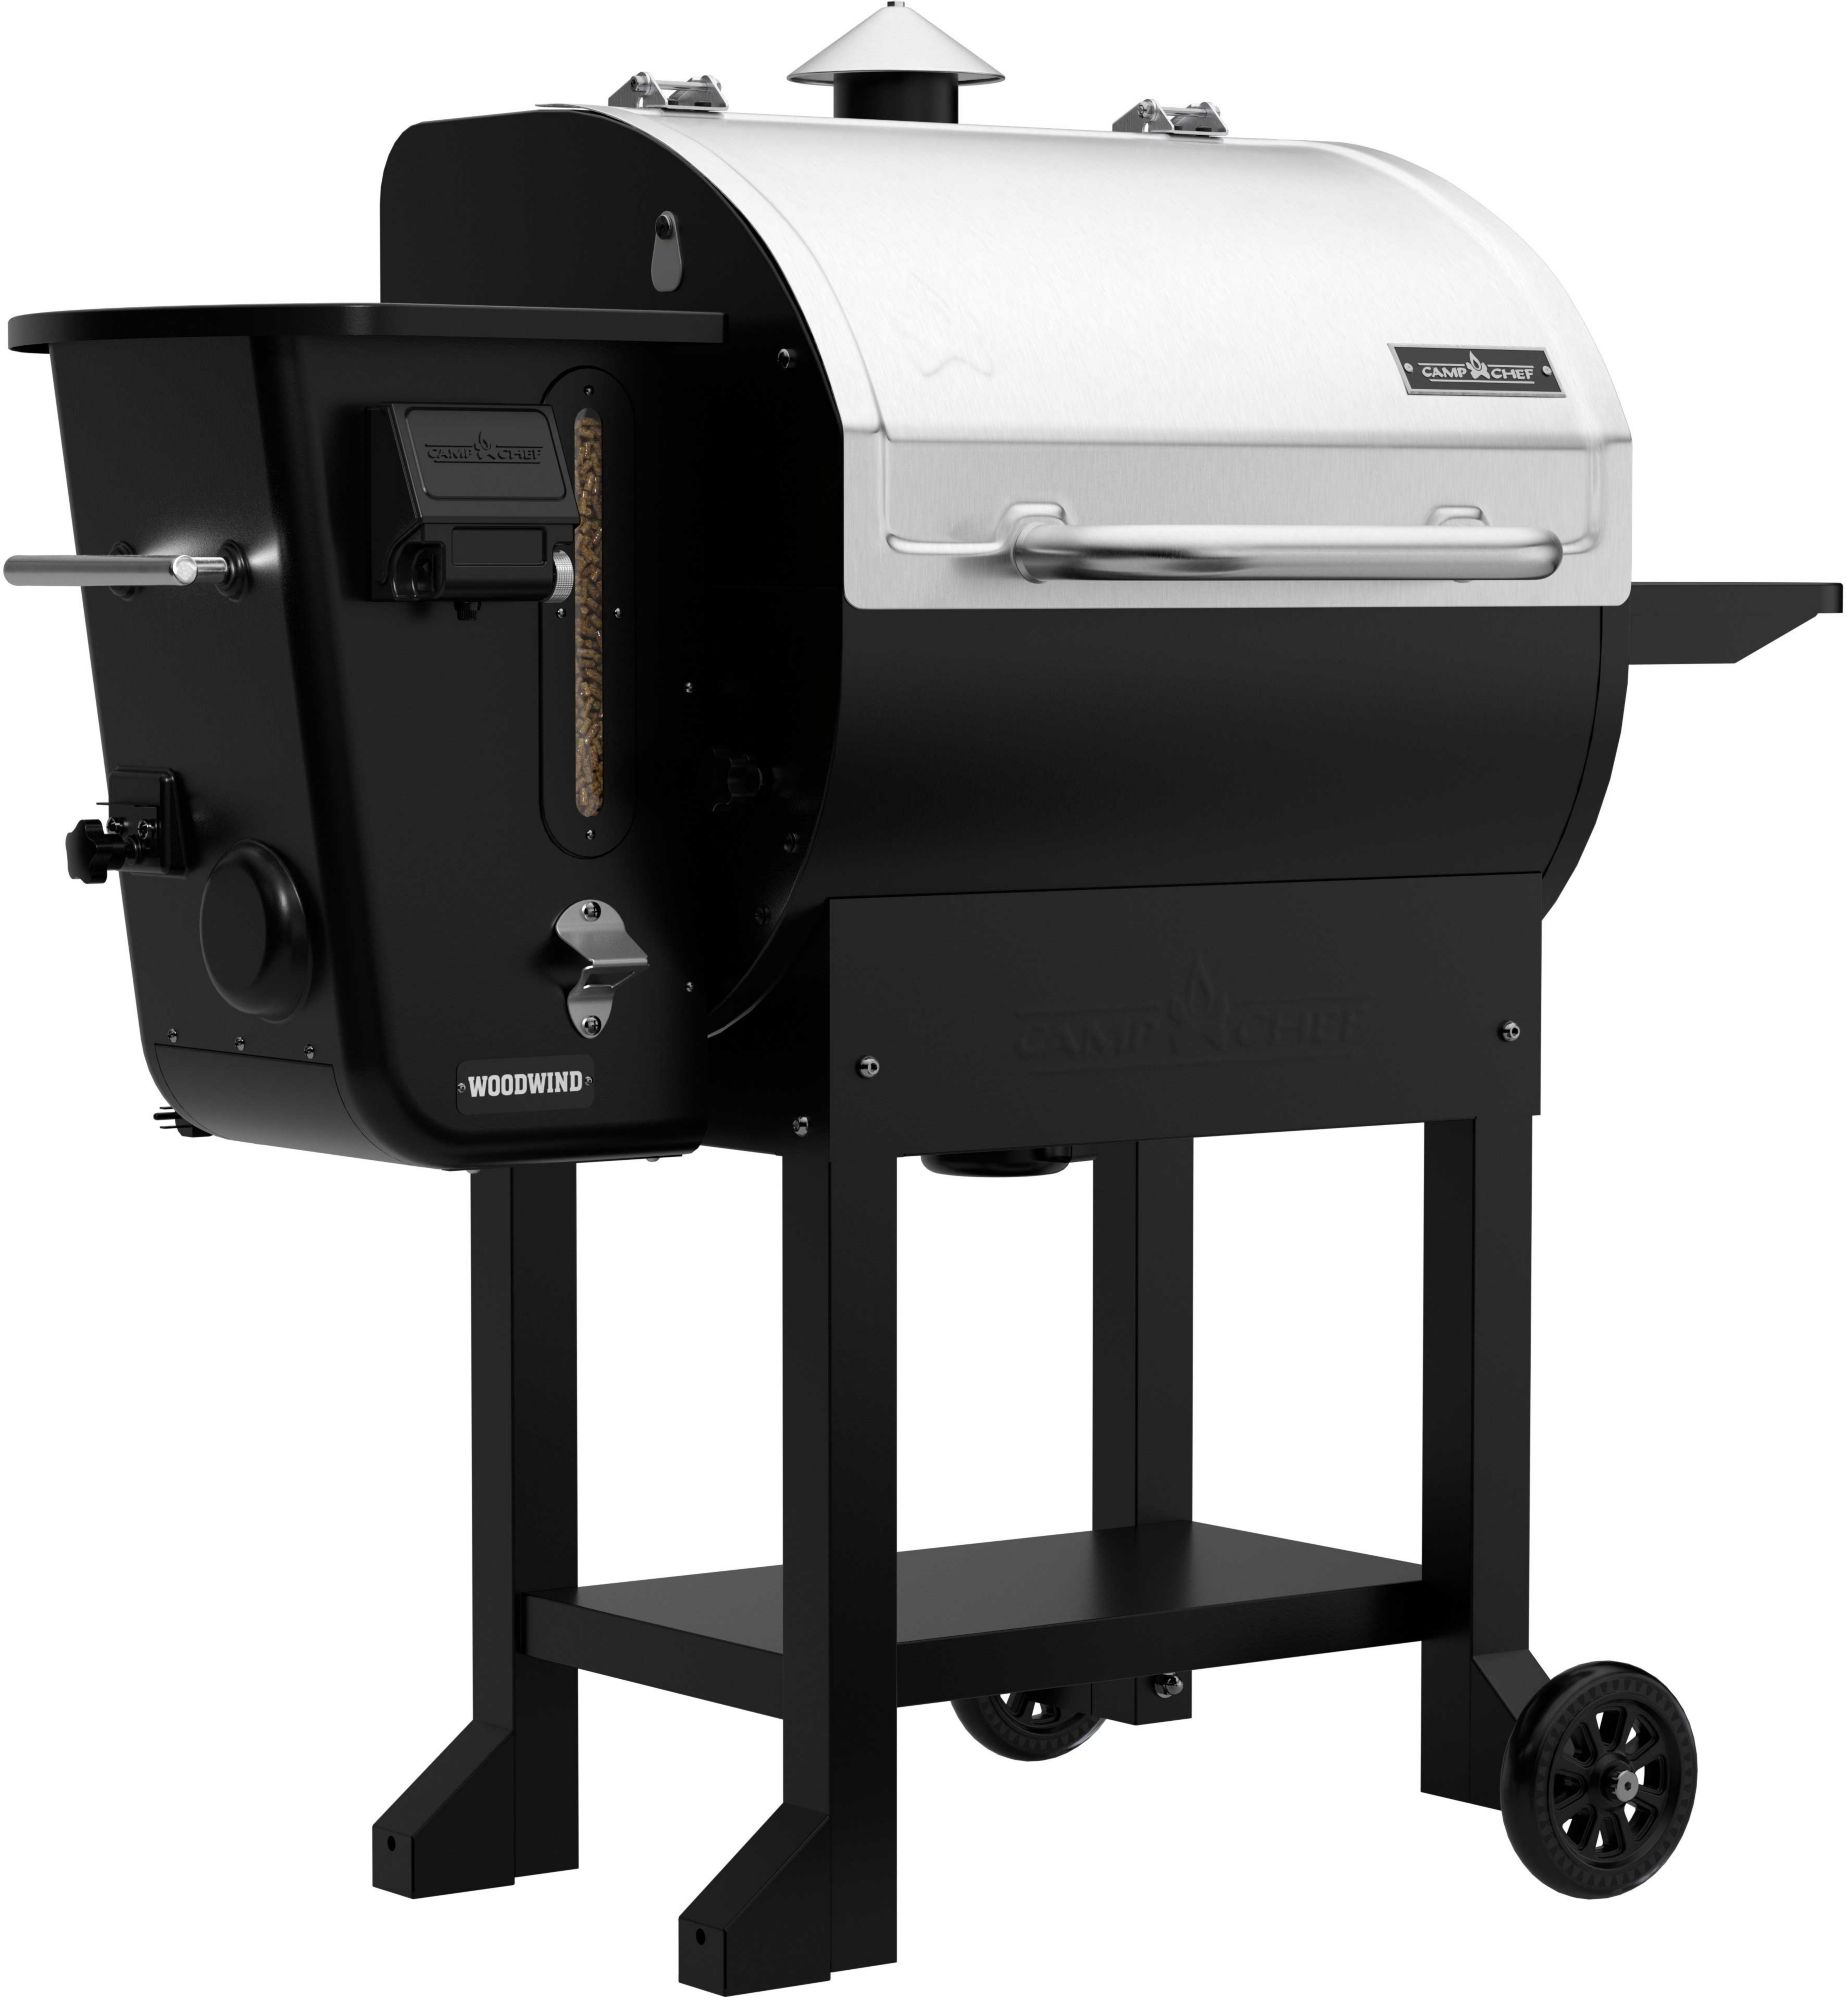 Camp Chef Woodwind 24 WiFi Pellet Grill $650.97